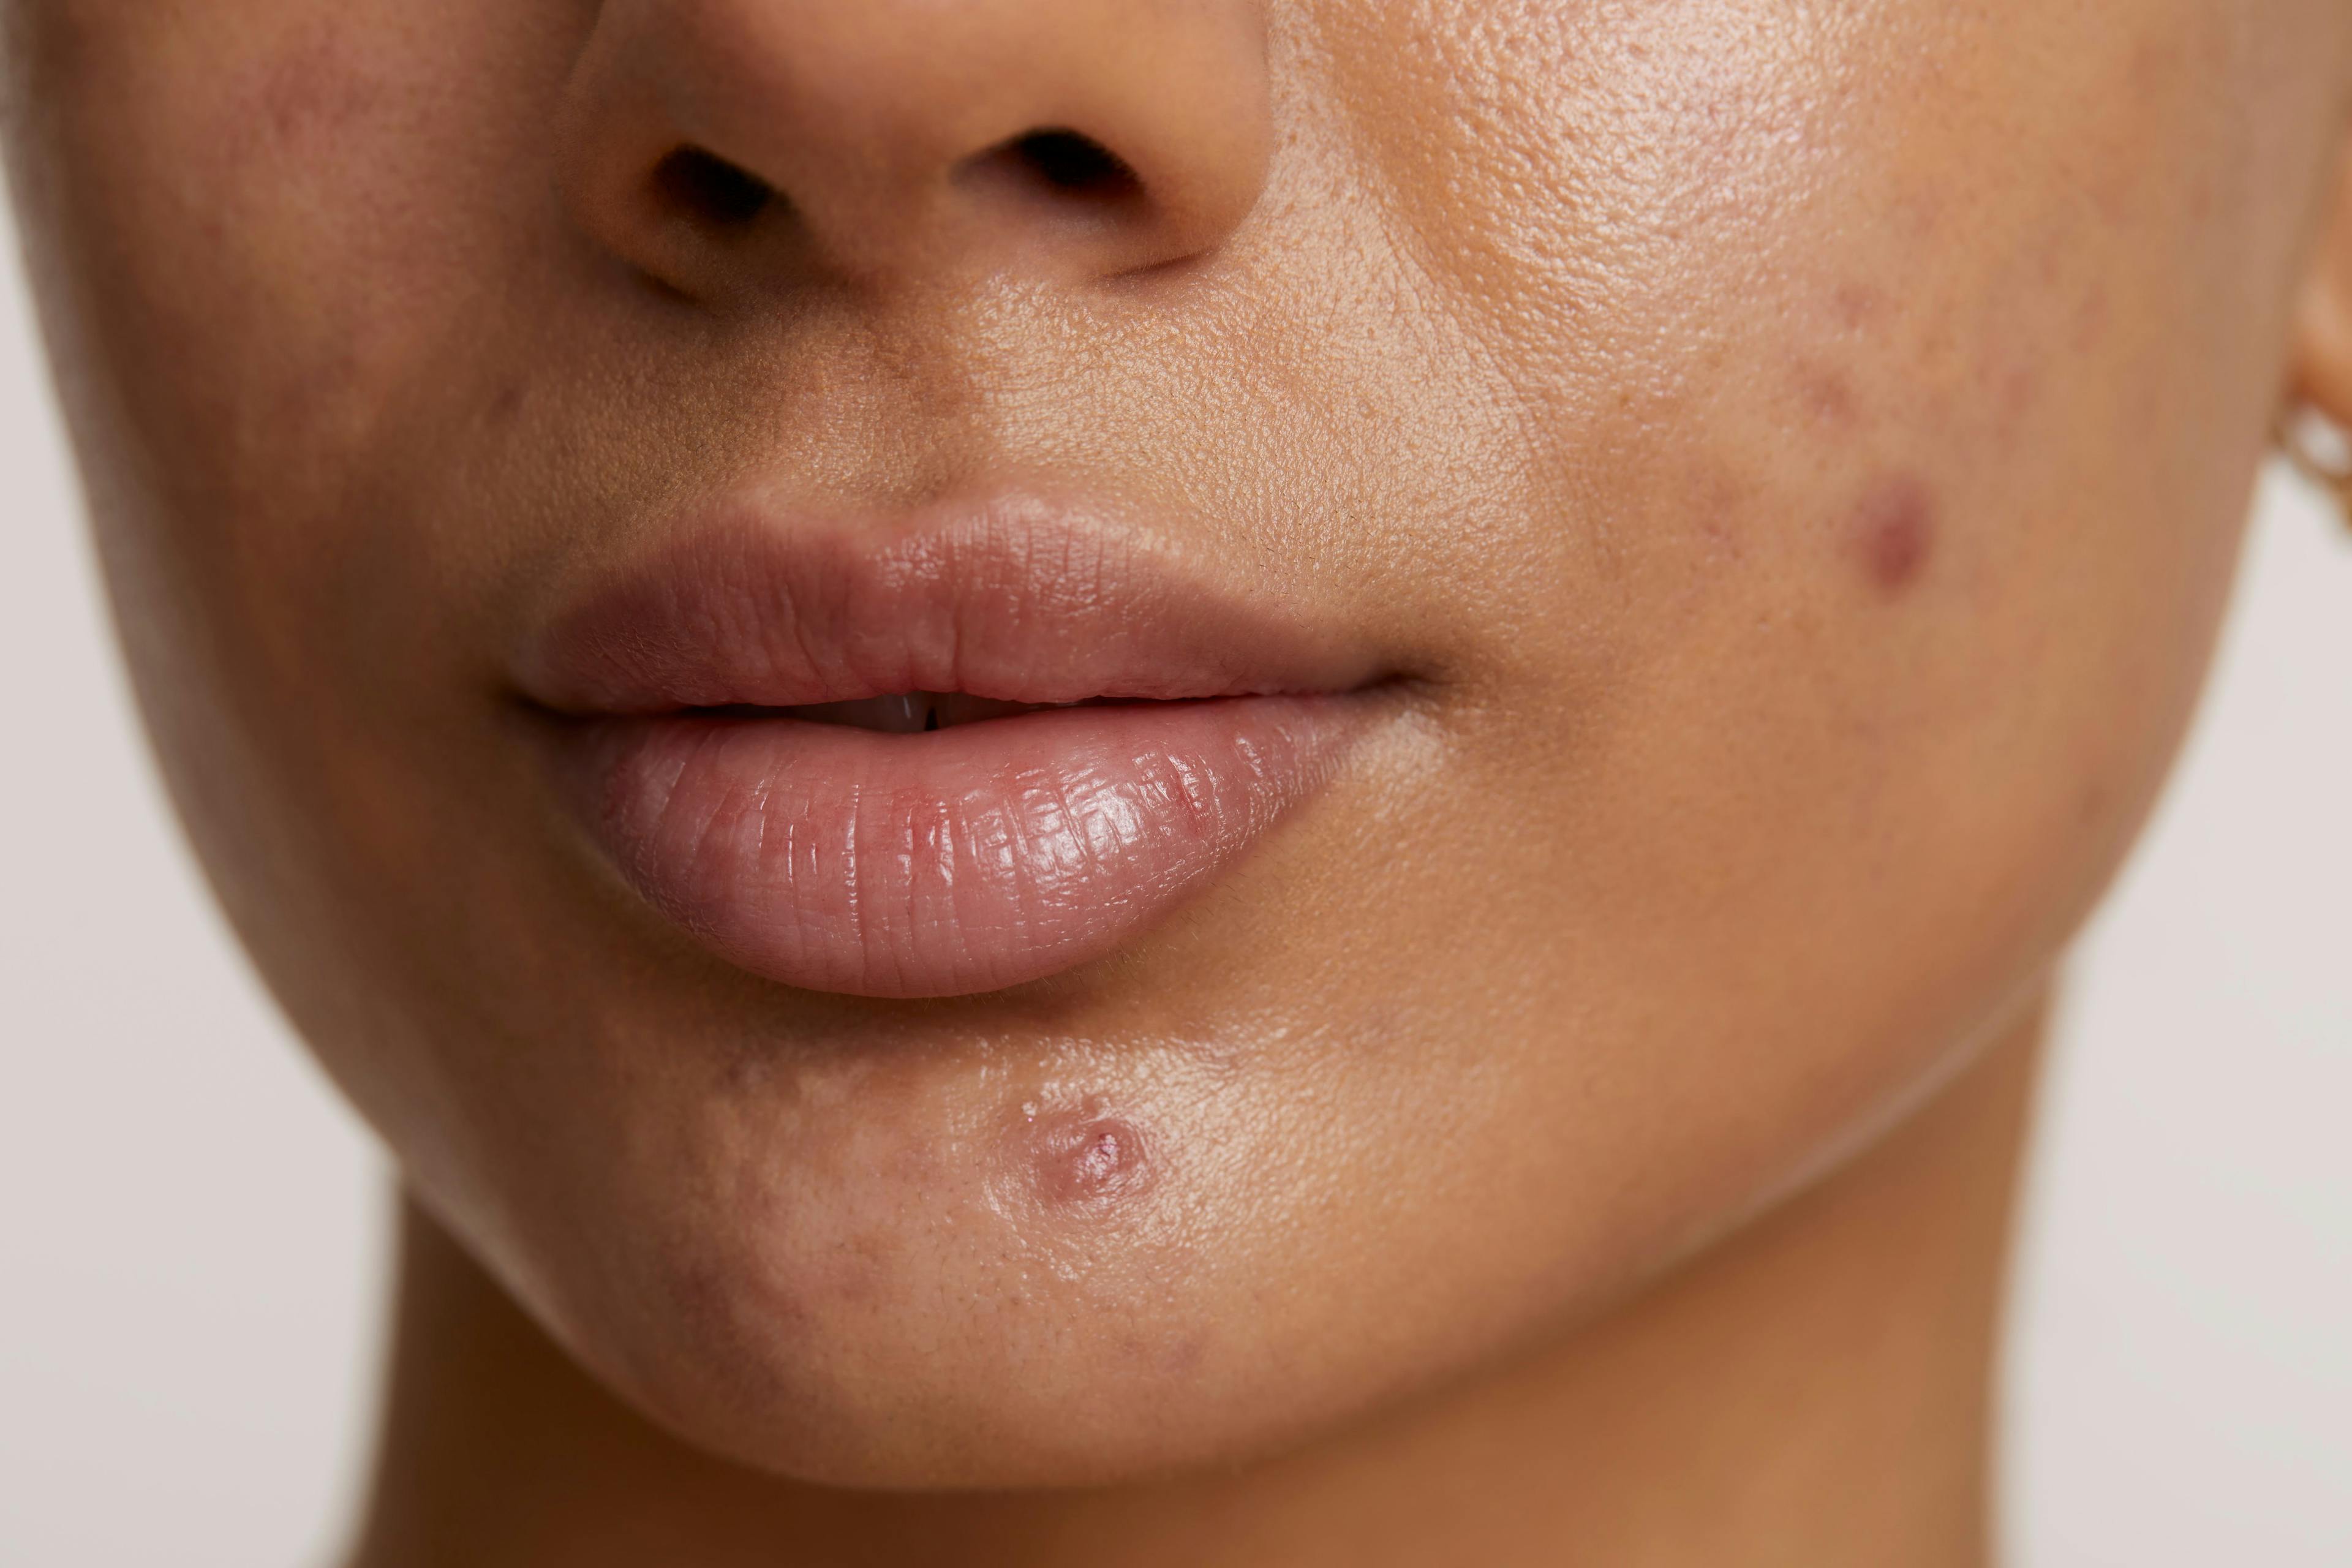 Study Examines Psychological Comorbidities Among Acne Patients Using Isotretinoin